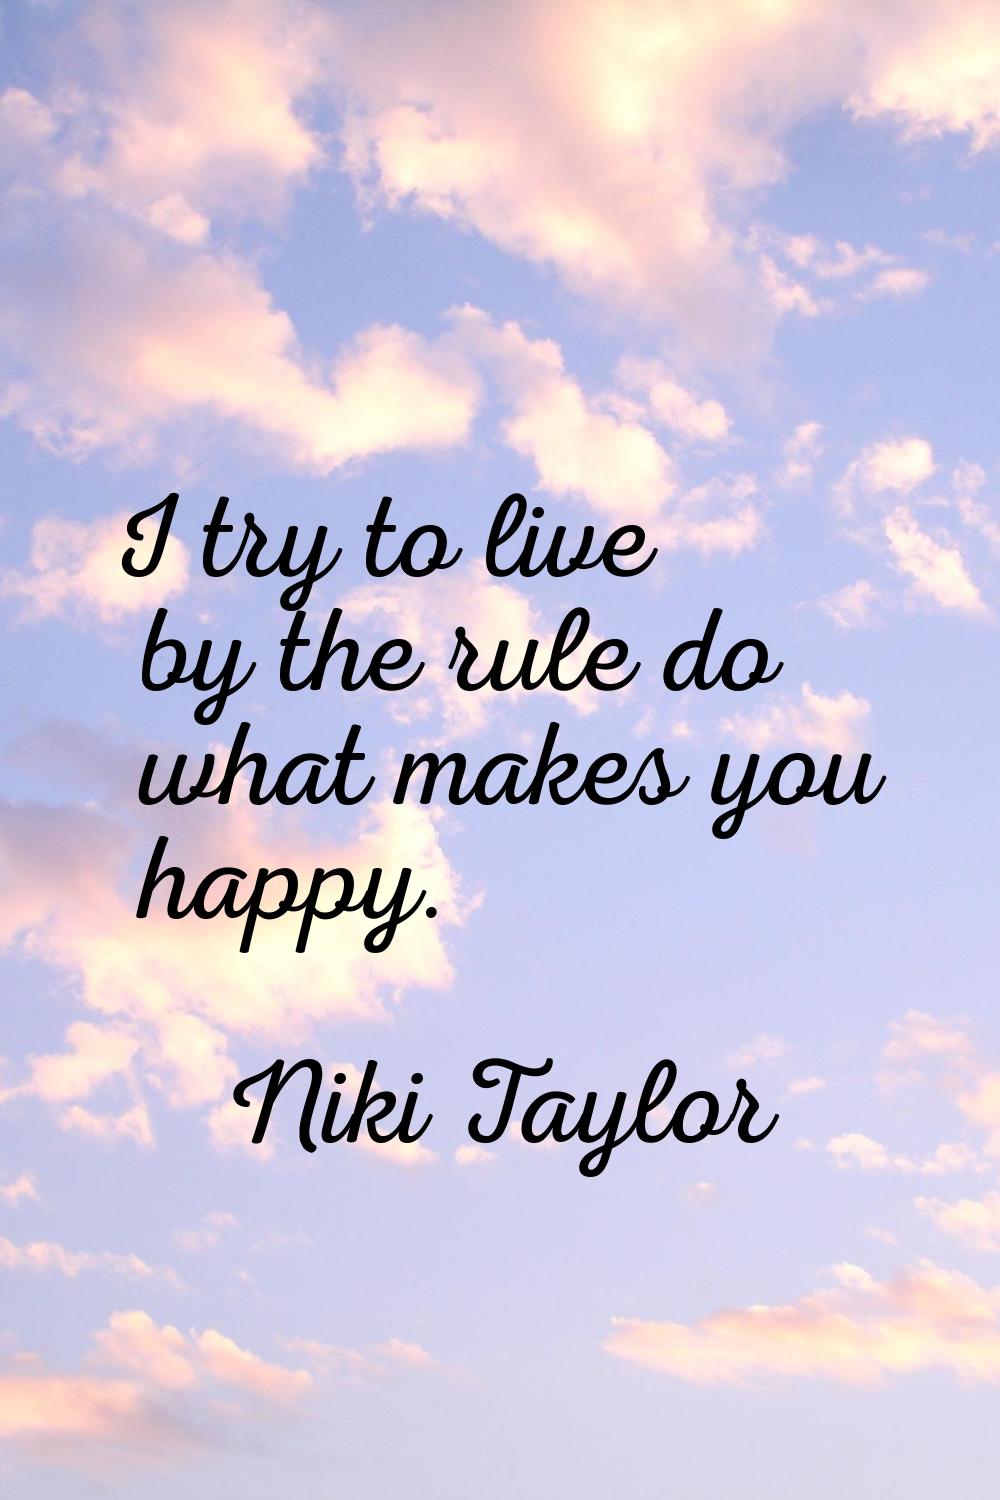 I try to live by the rule do what makes you happy.